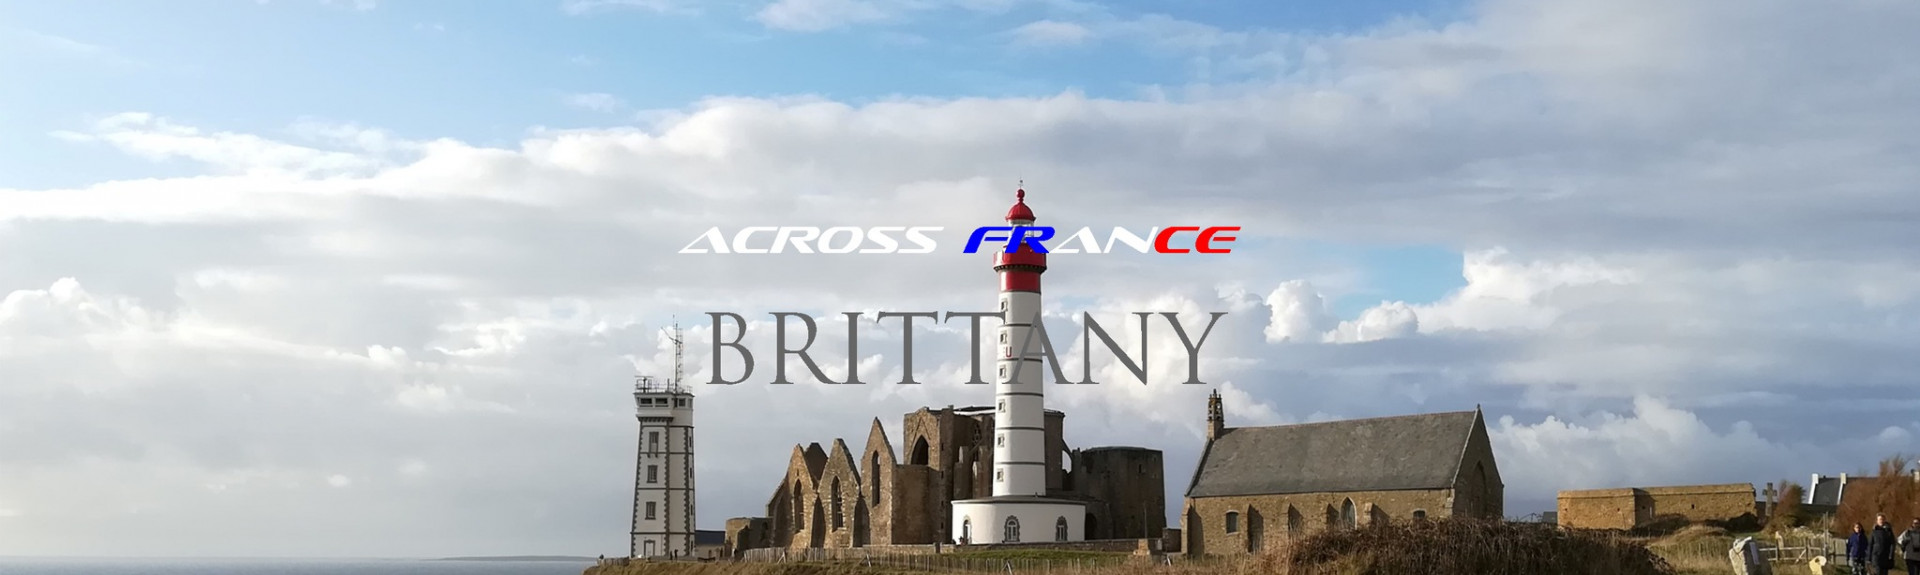 Across France Brittany